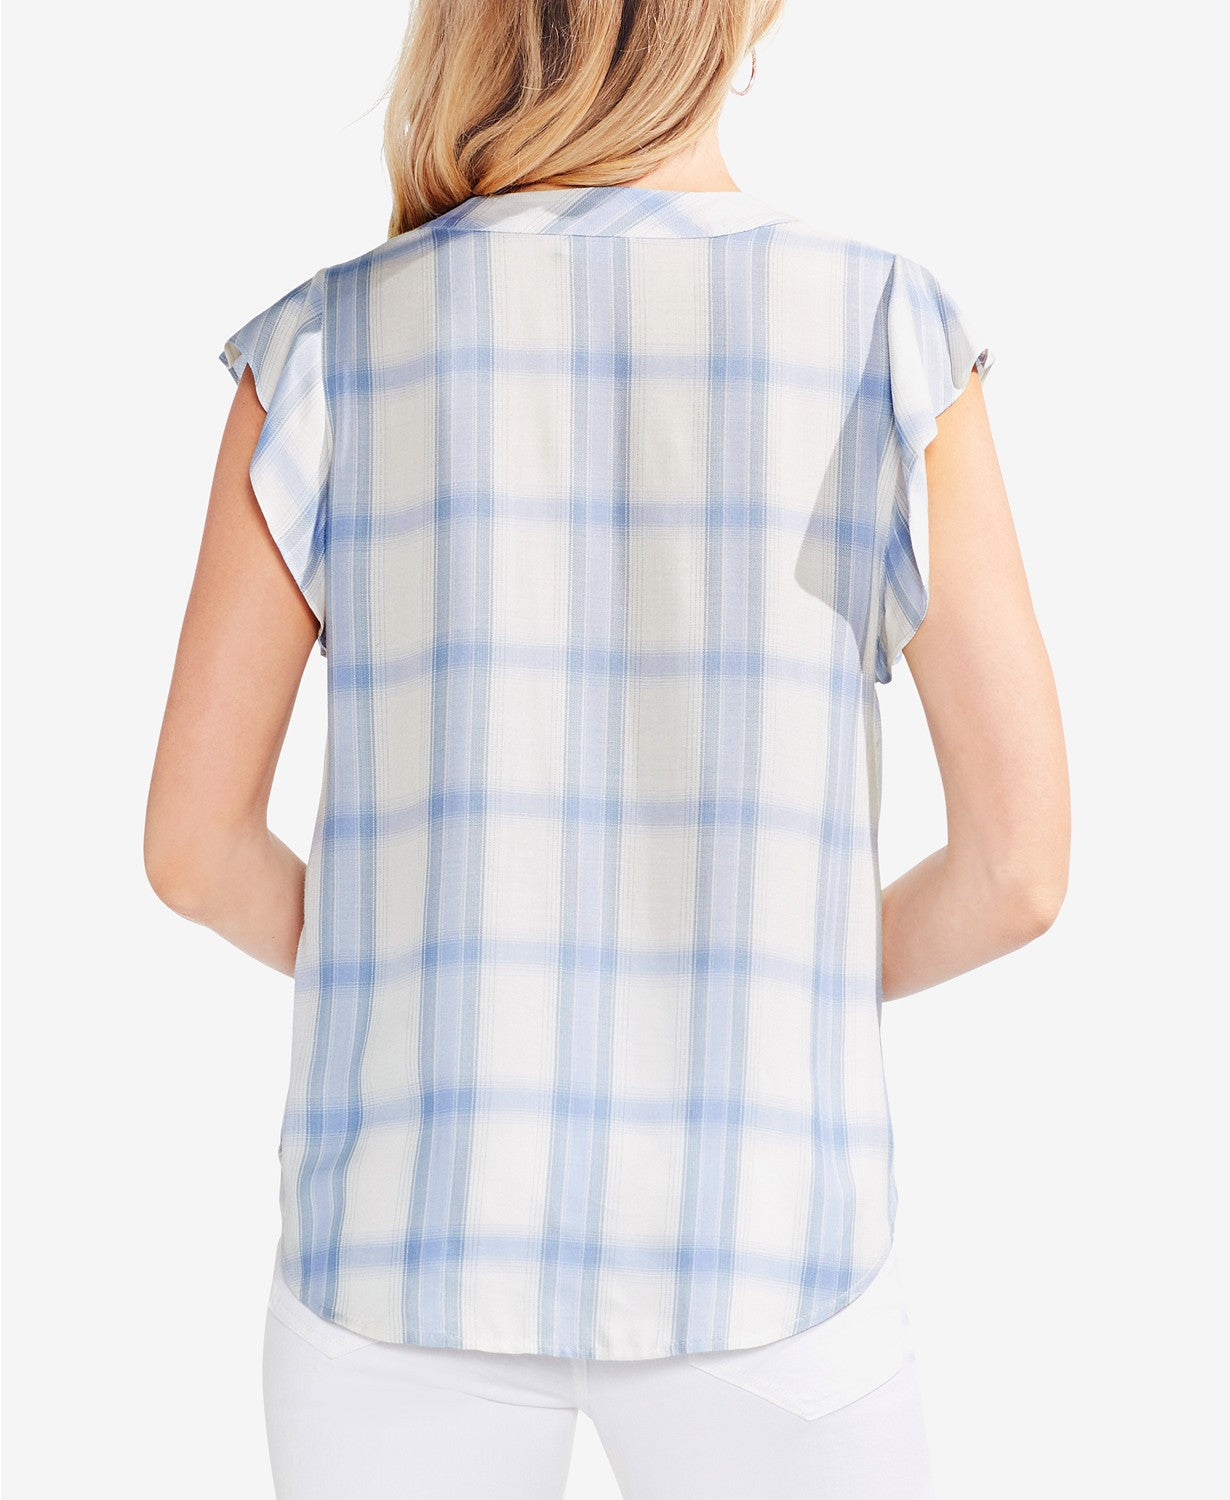 Vince Camuto Womens Plaid Flutter Sleeve Top